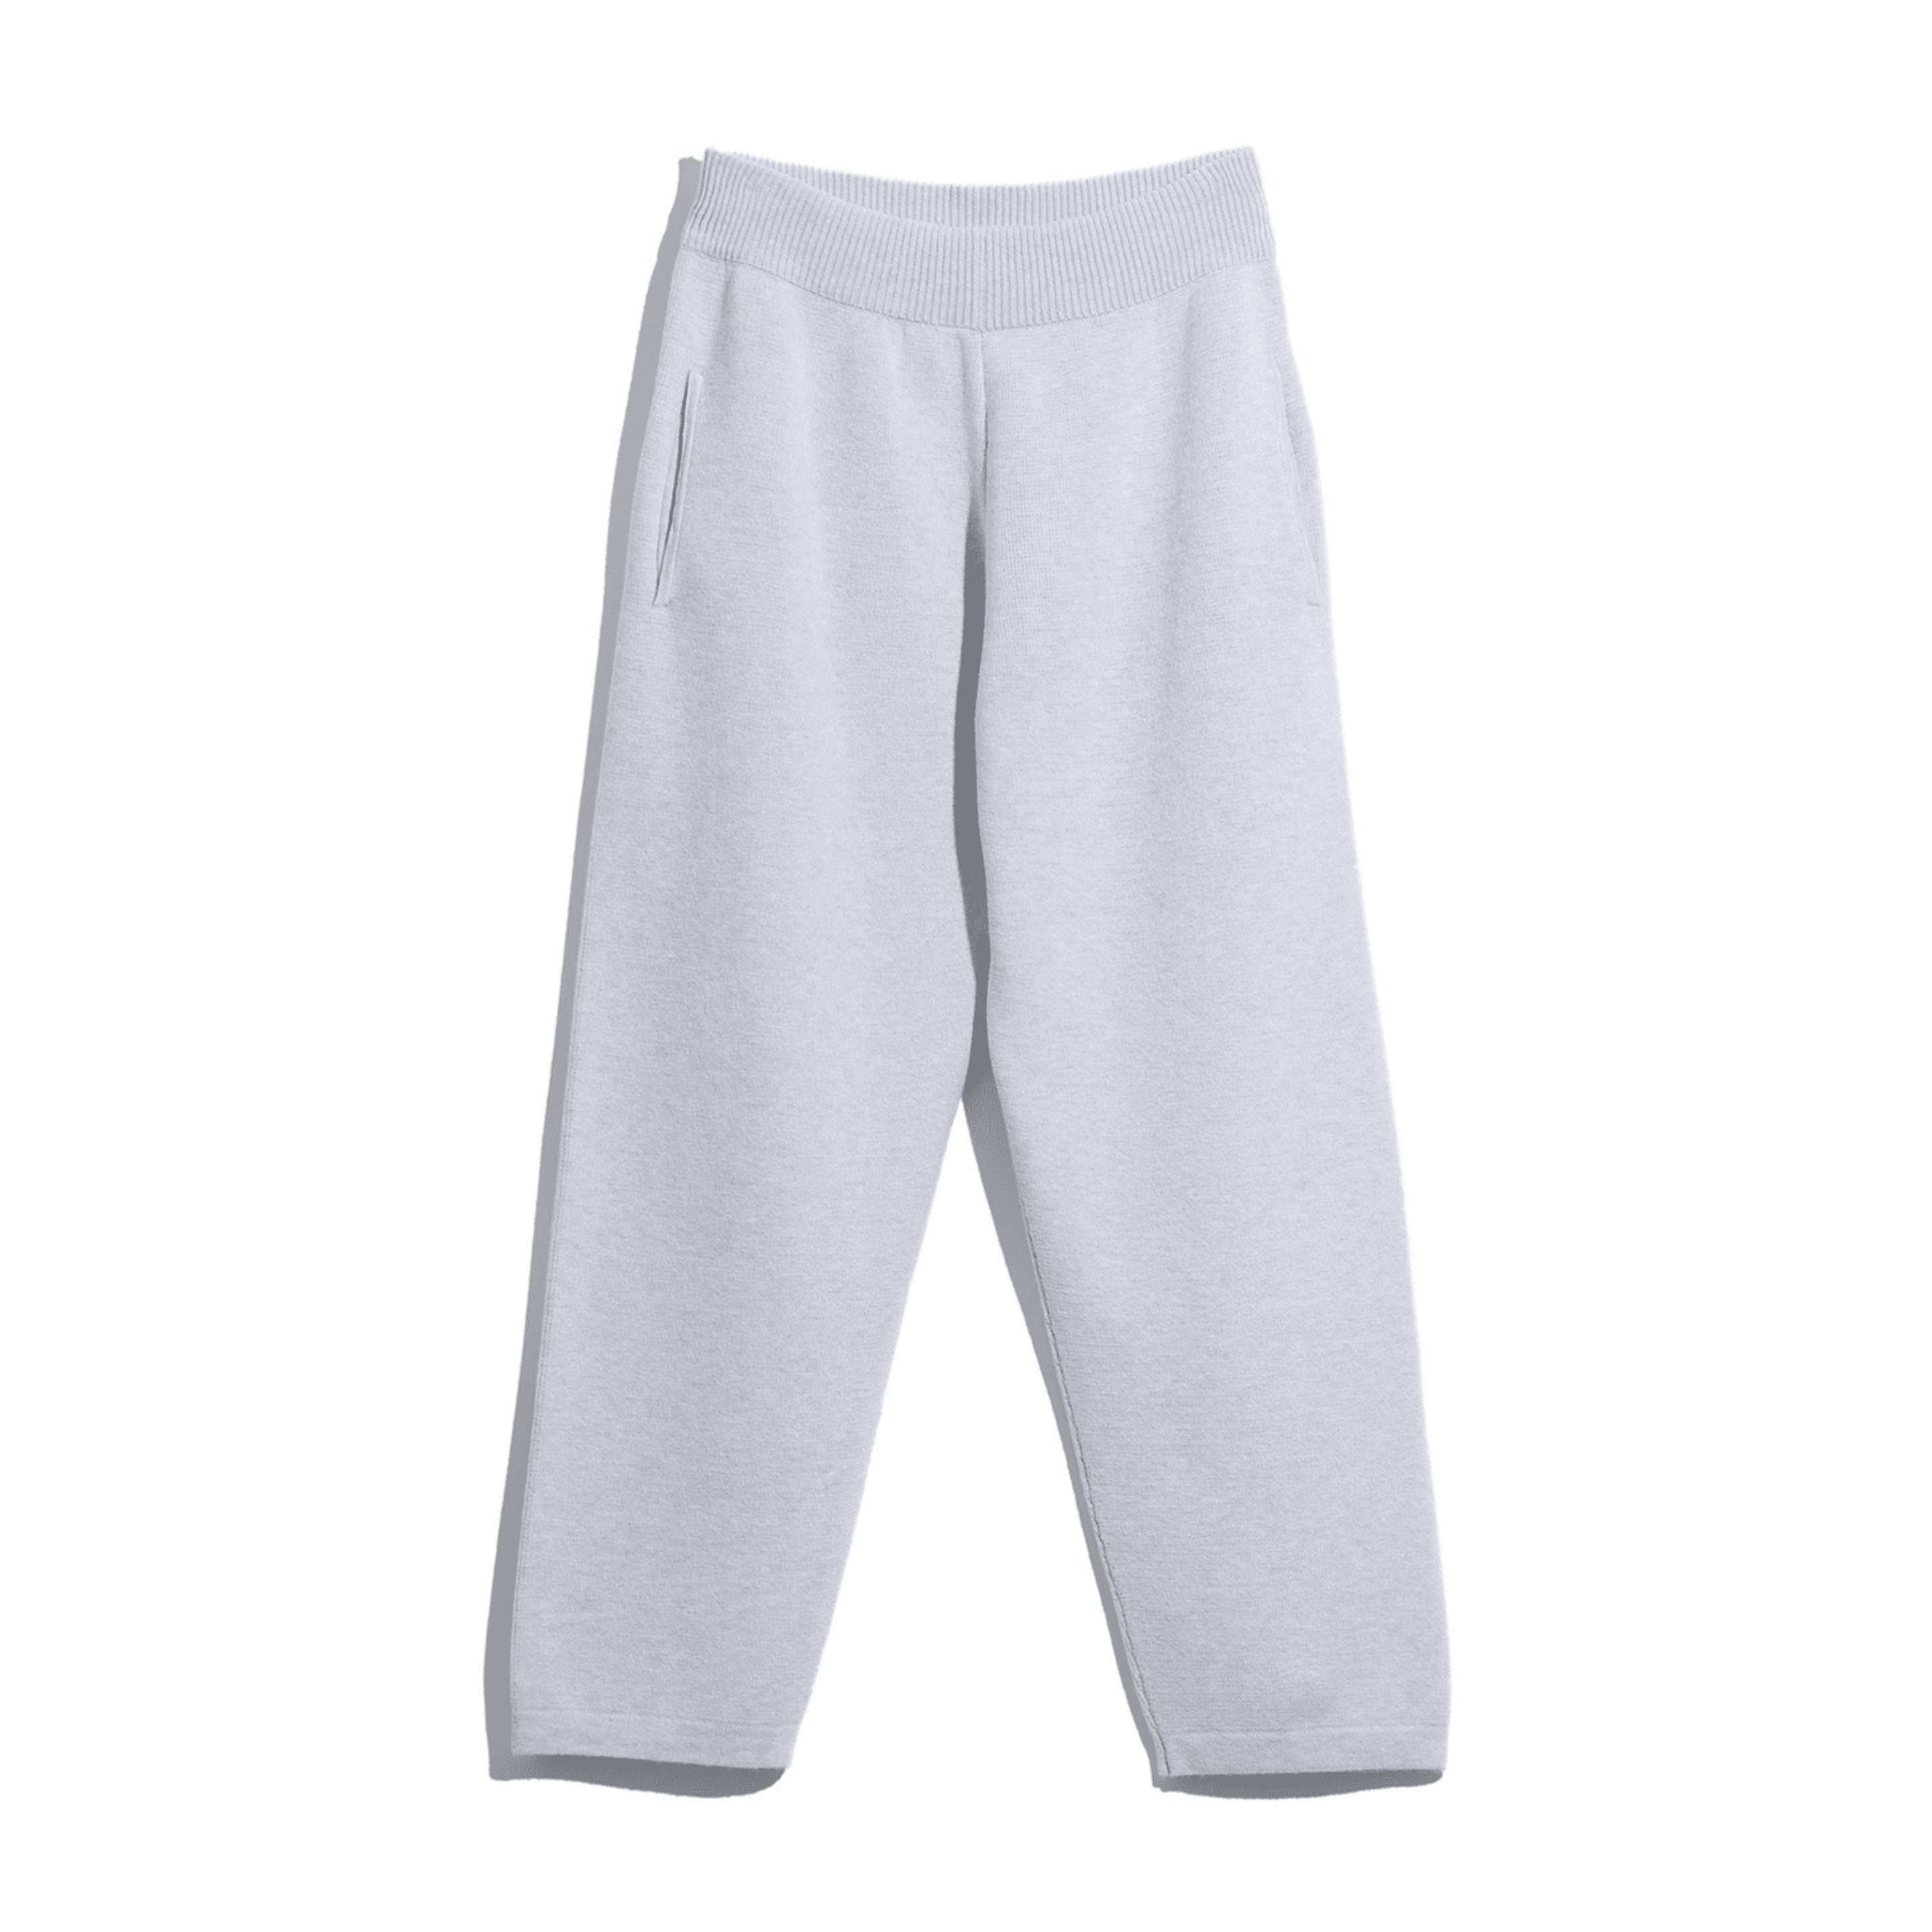 Cotton/Linen Gray and White Cotton Ladies Joggers at Rs 899/piece in Kolkata